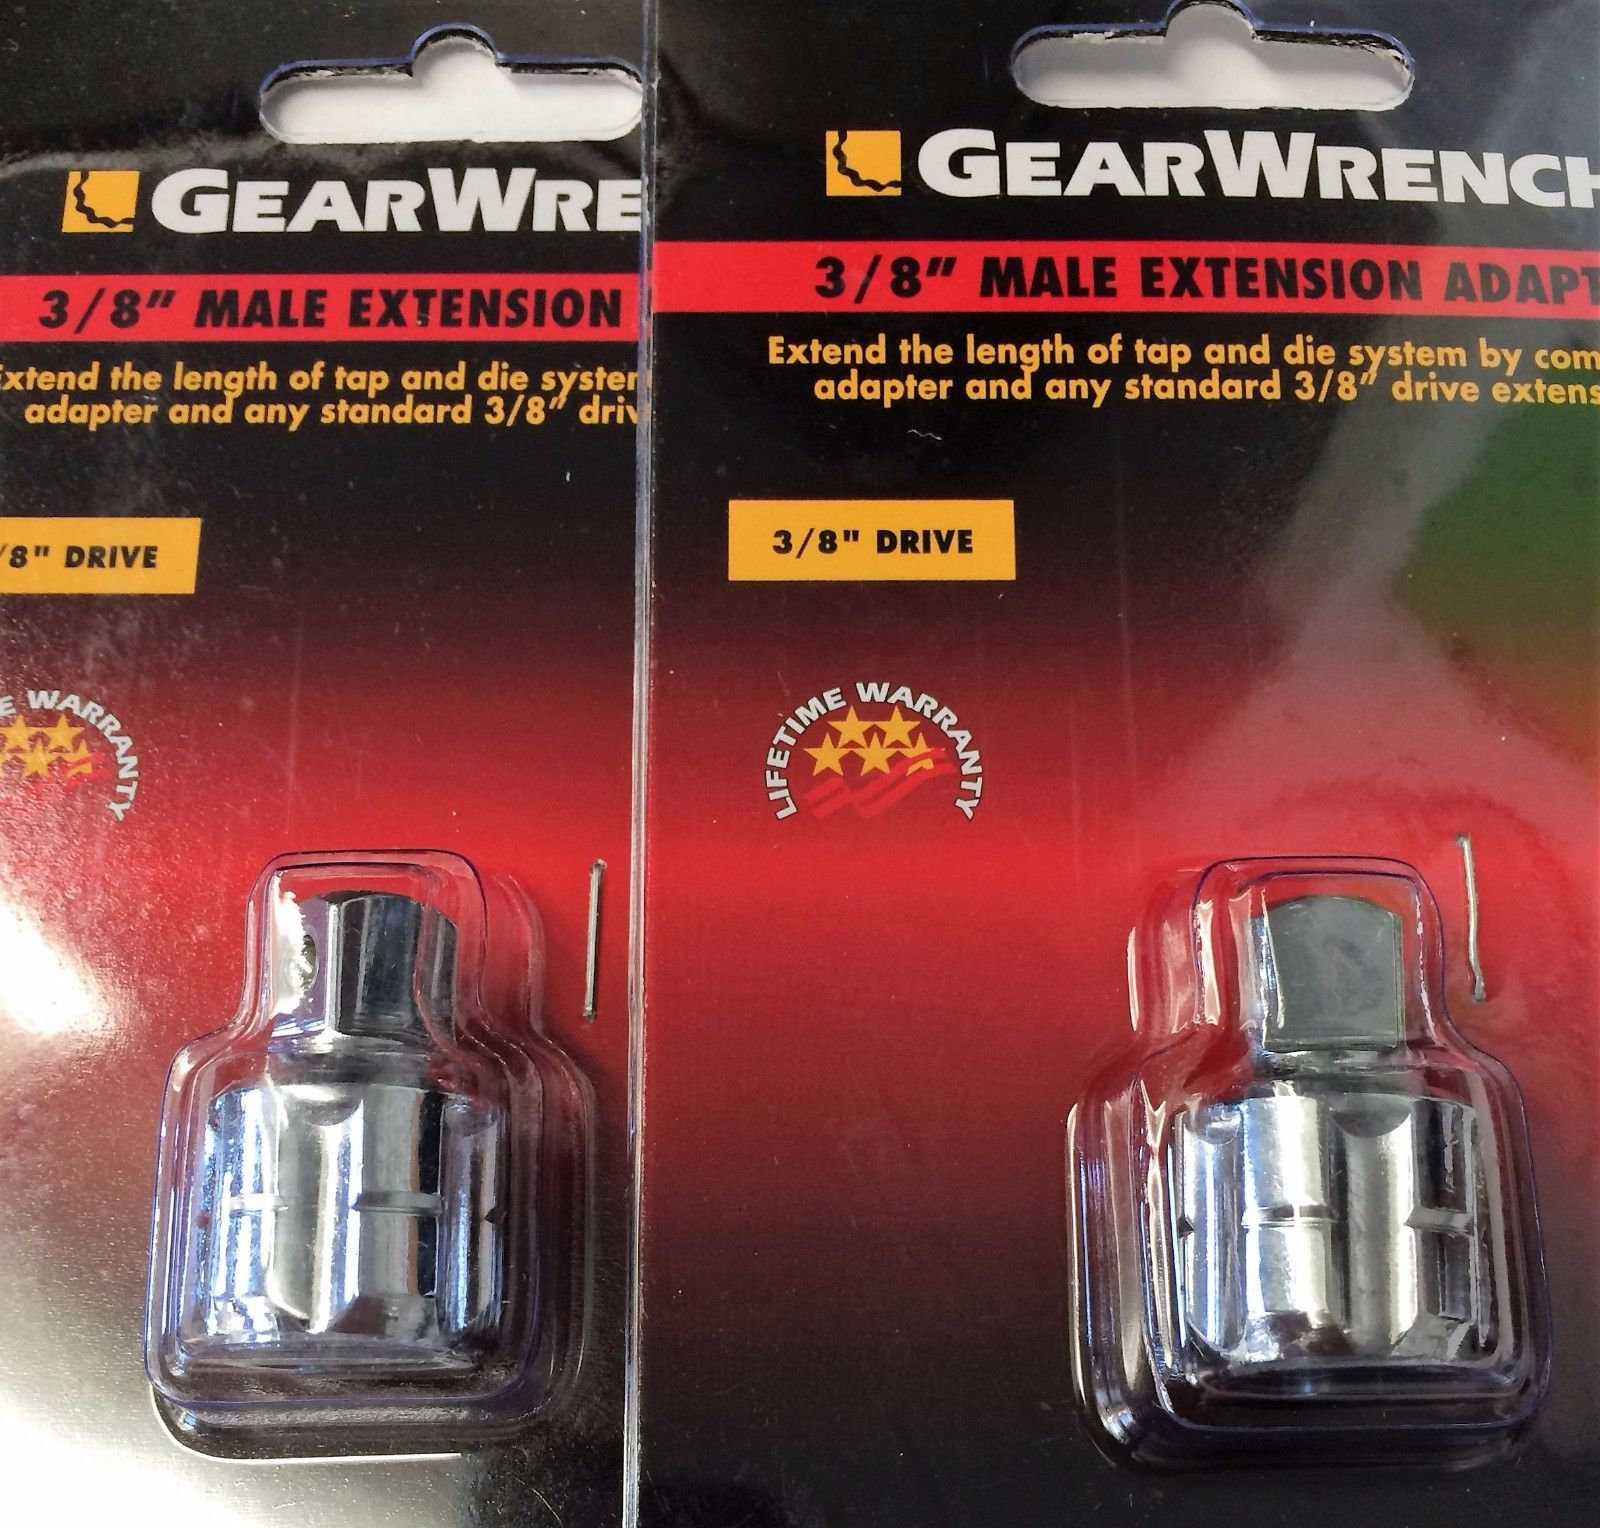 GearWrench 82803D Male Extension Adapter 3/8" Drive (2 Packs)